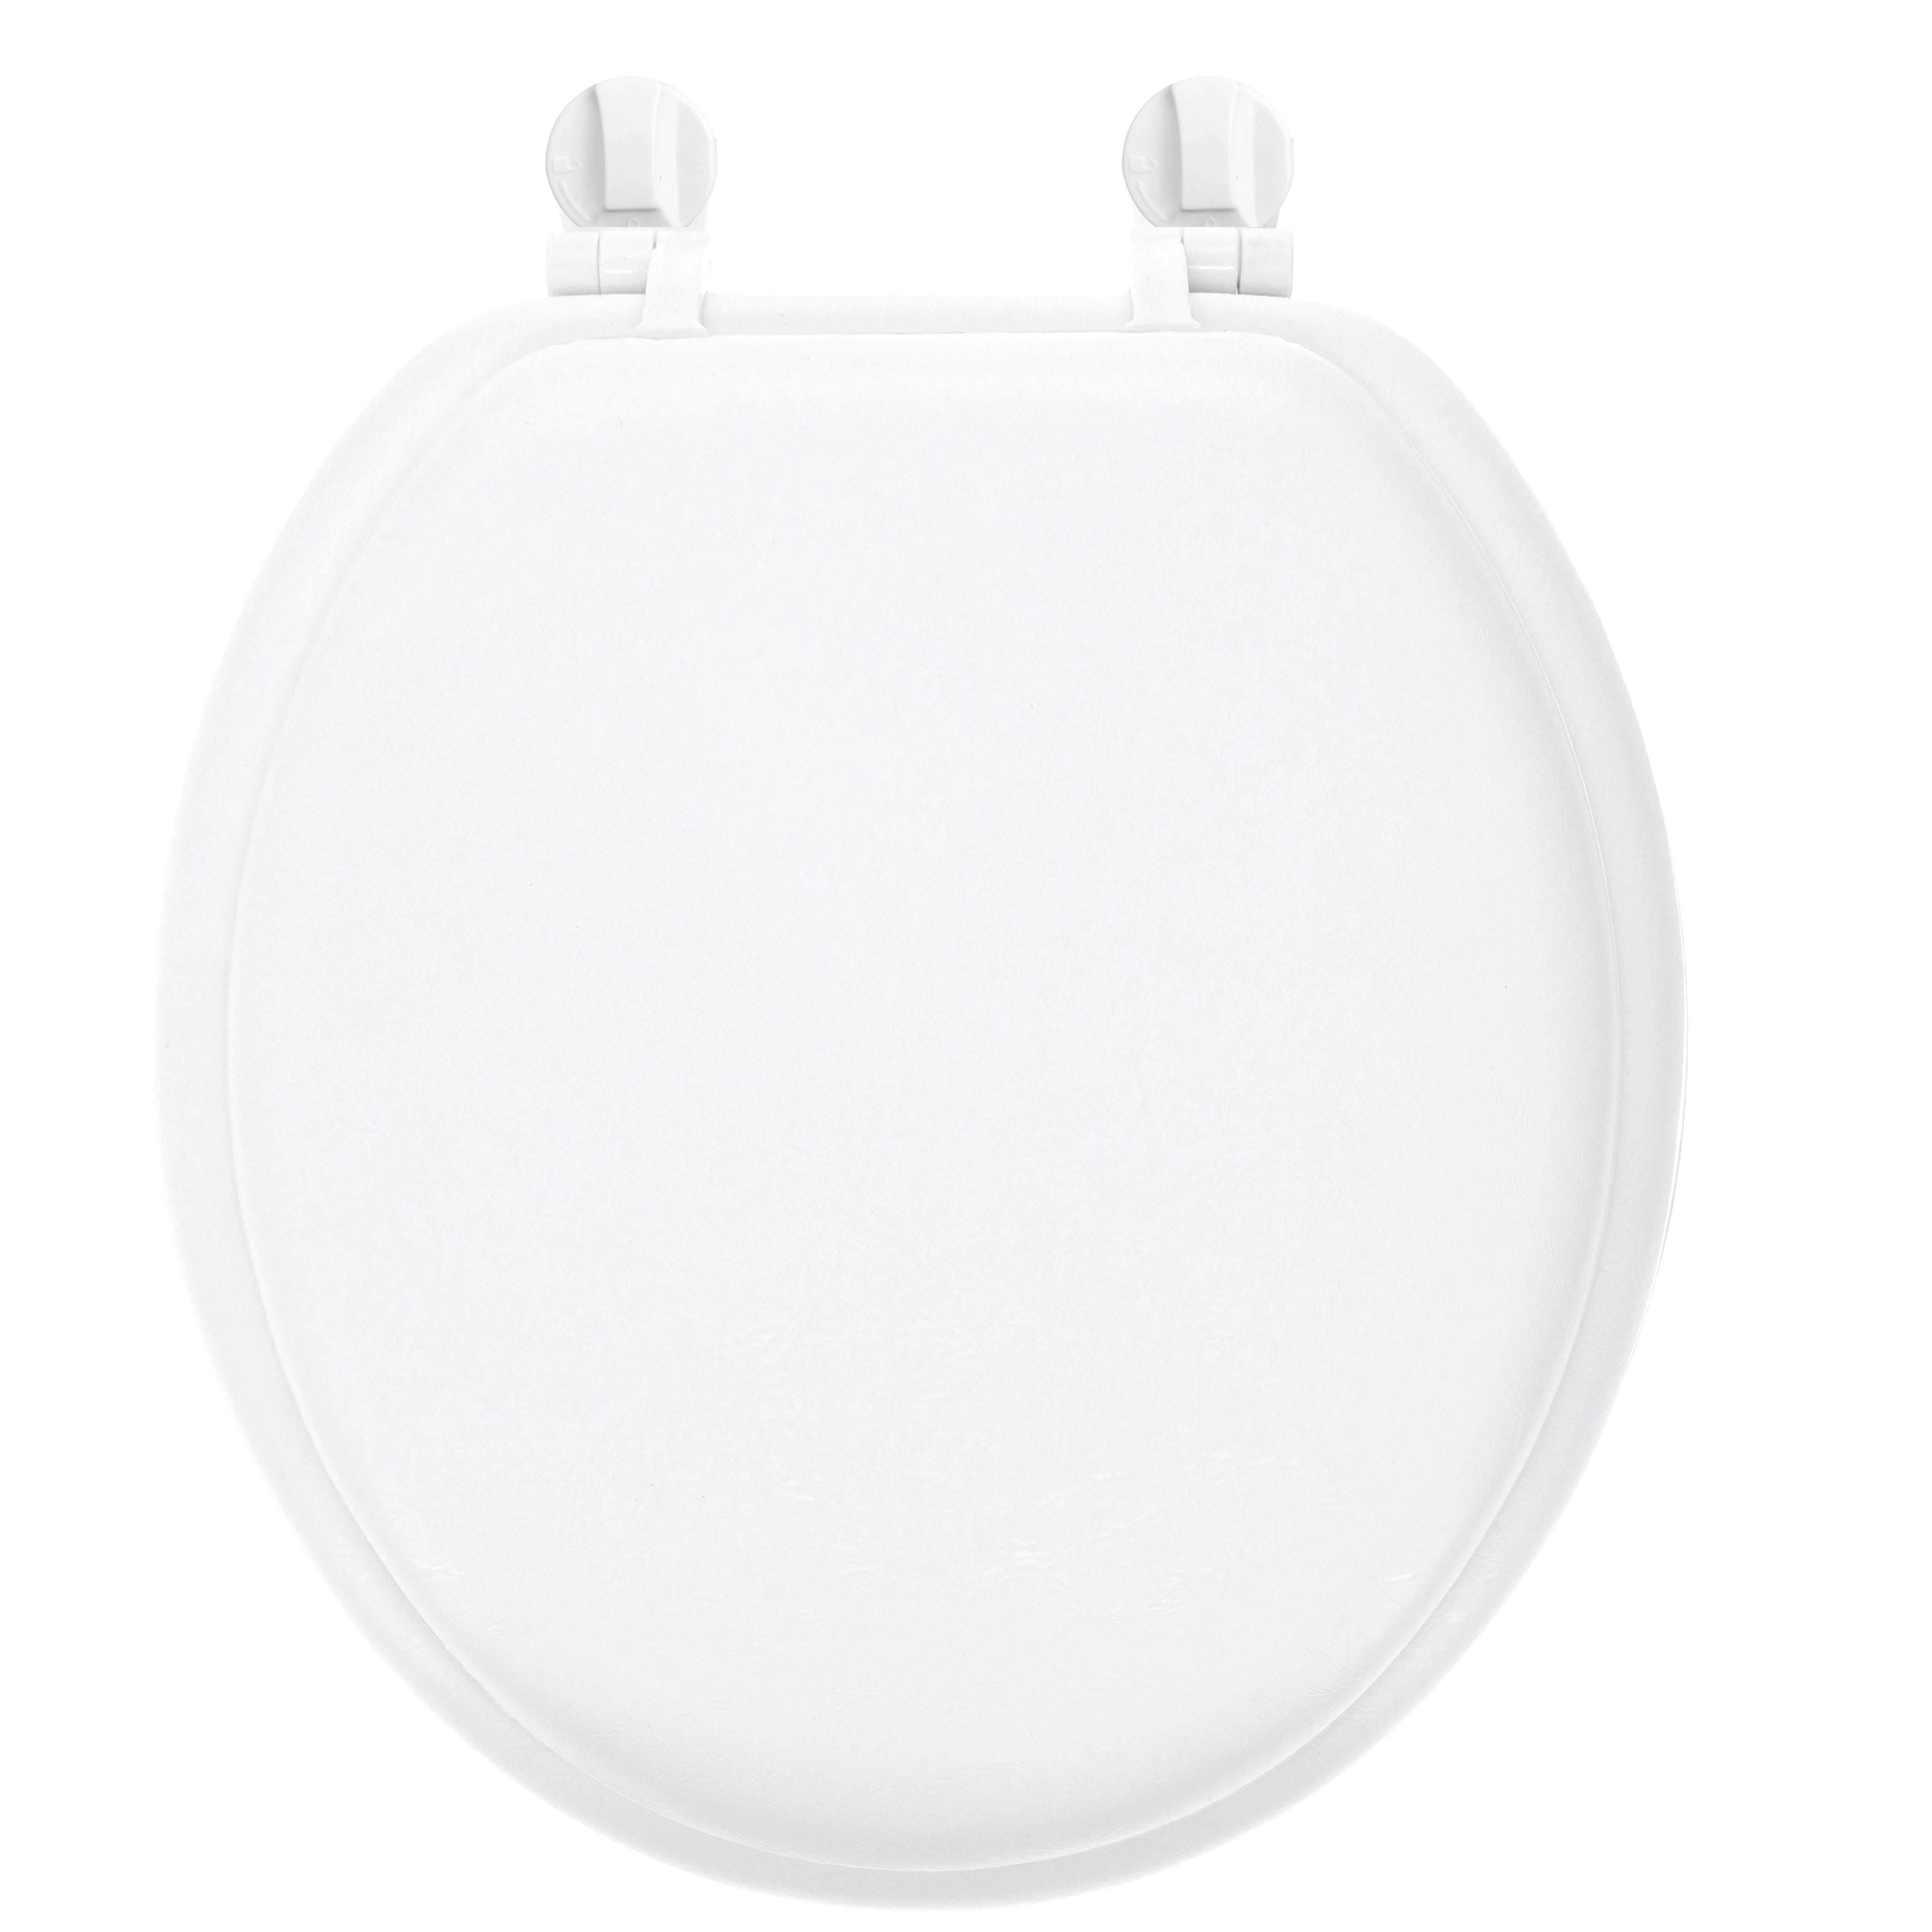 SOFT PADDED TOILET SEAT STANDARD SIZE ROUND 